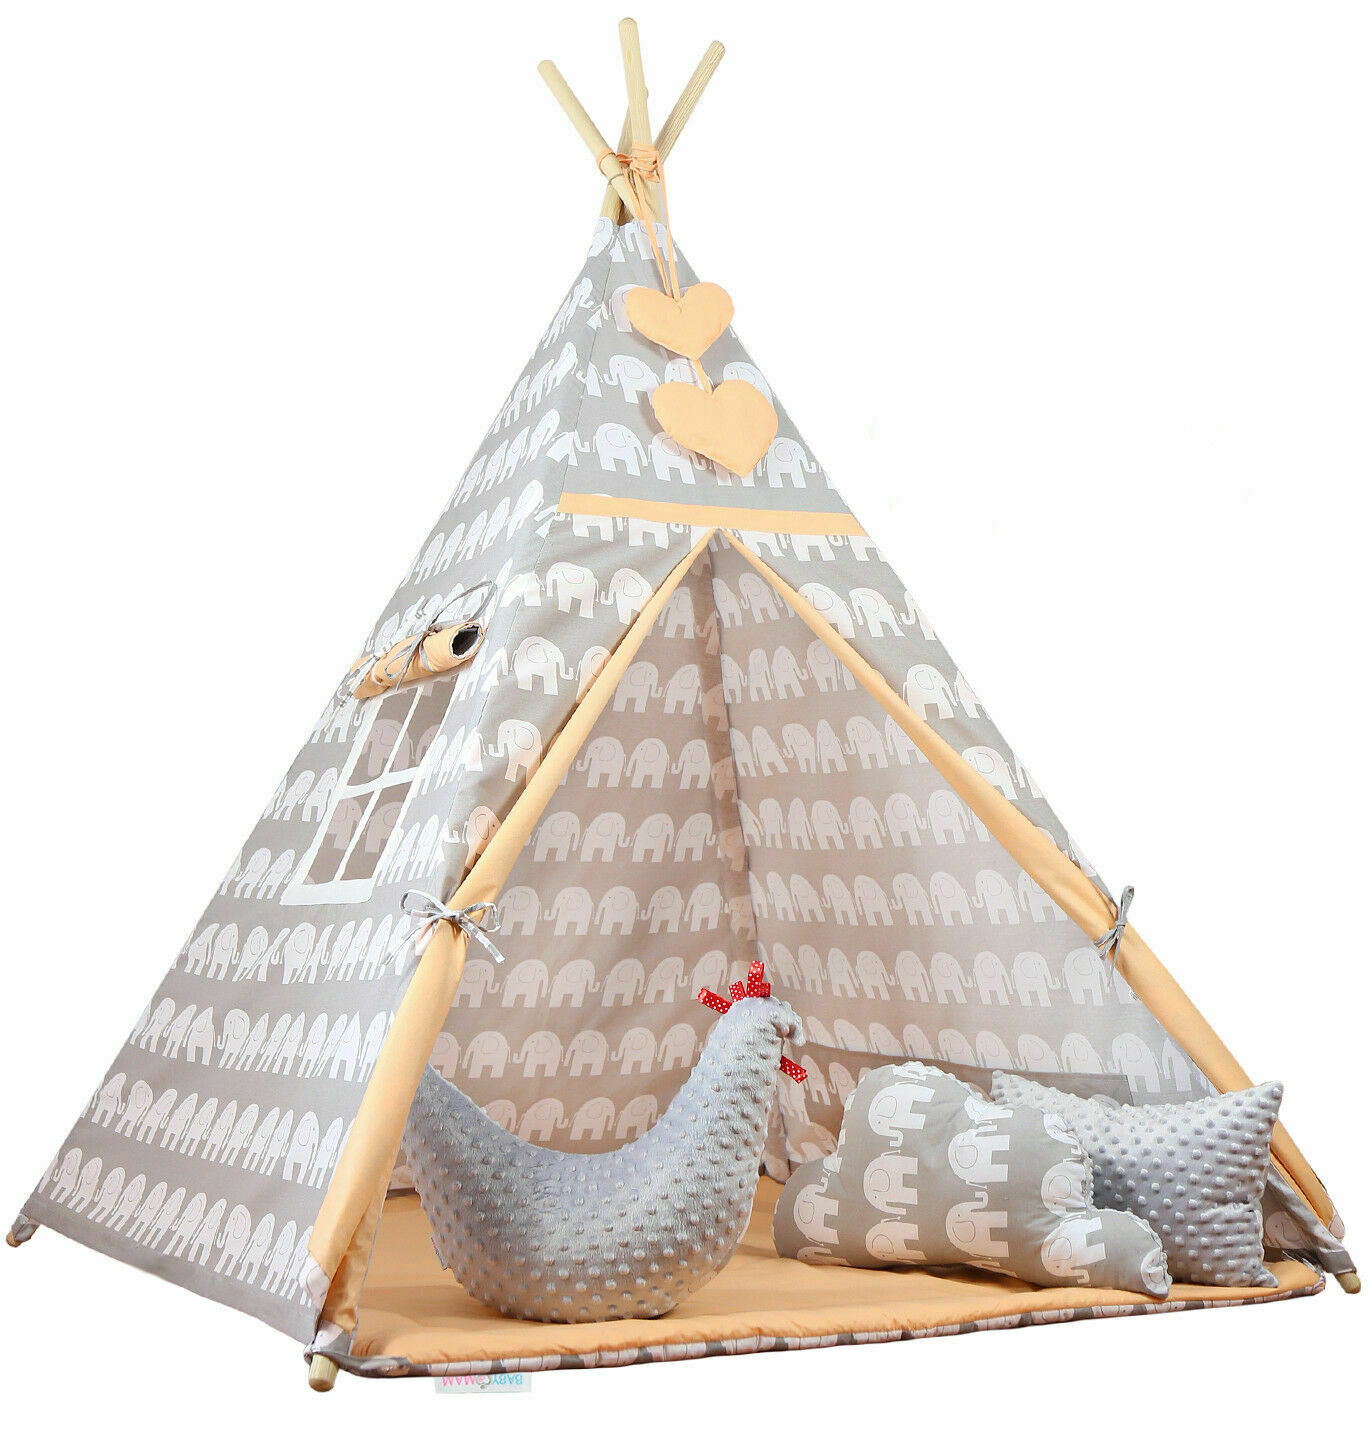 SMALL TEEPEE Wigwam Inddor Outdoor Kids Cotton Playhouse Tent Happy Savannah